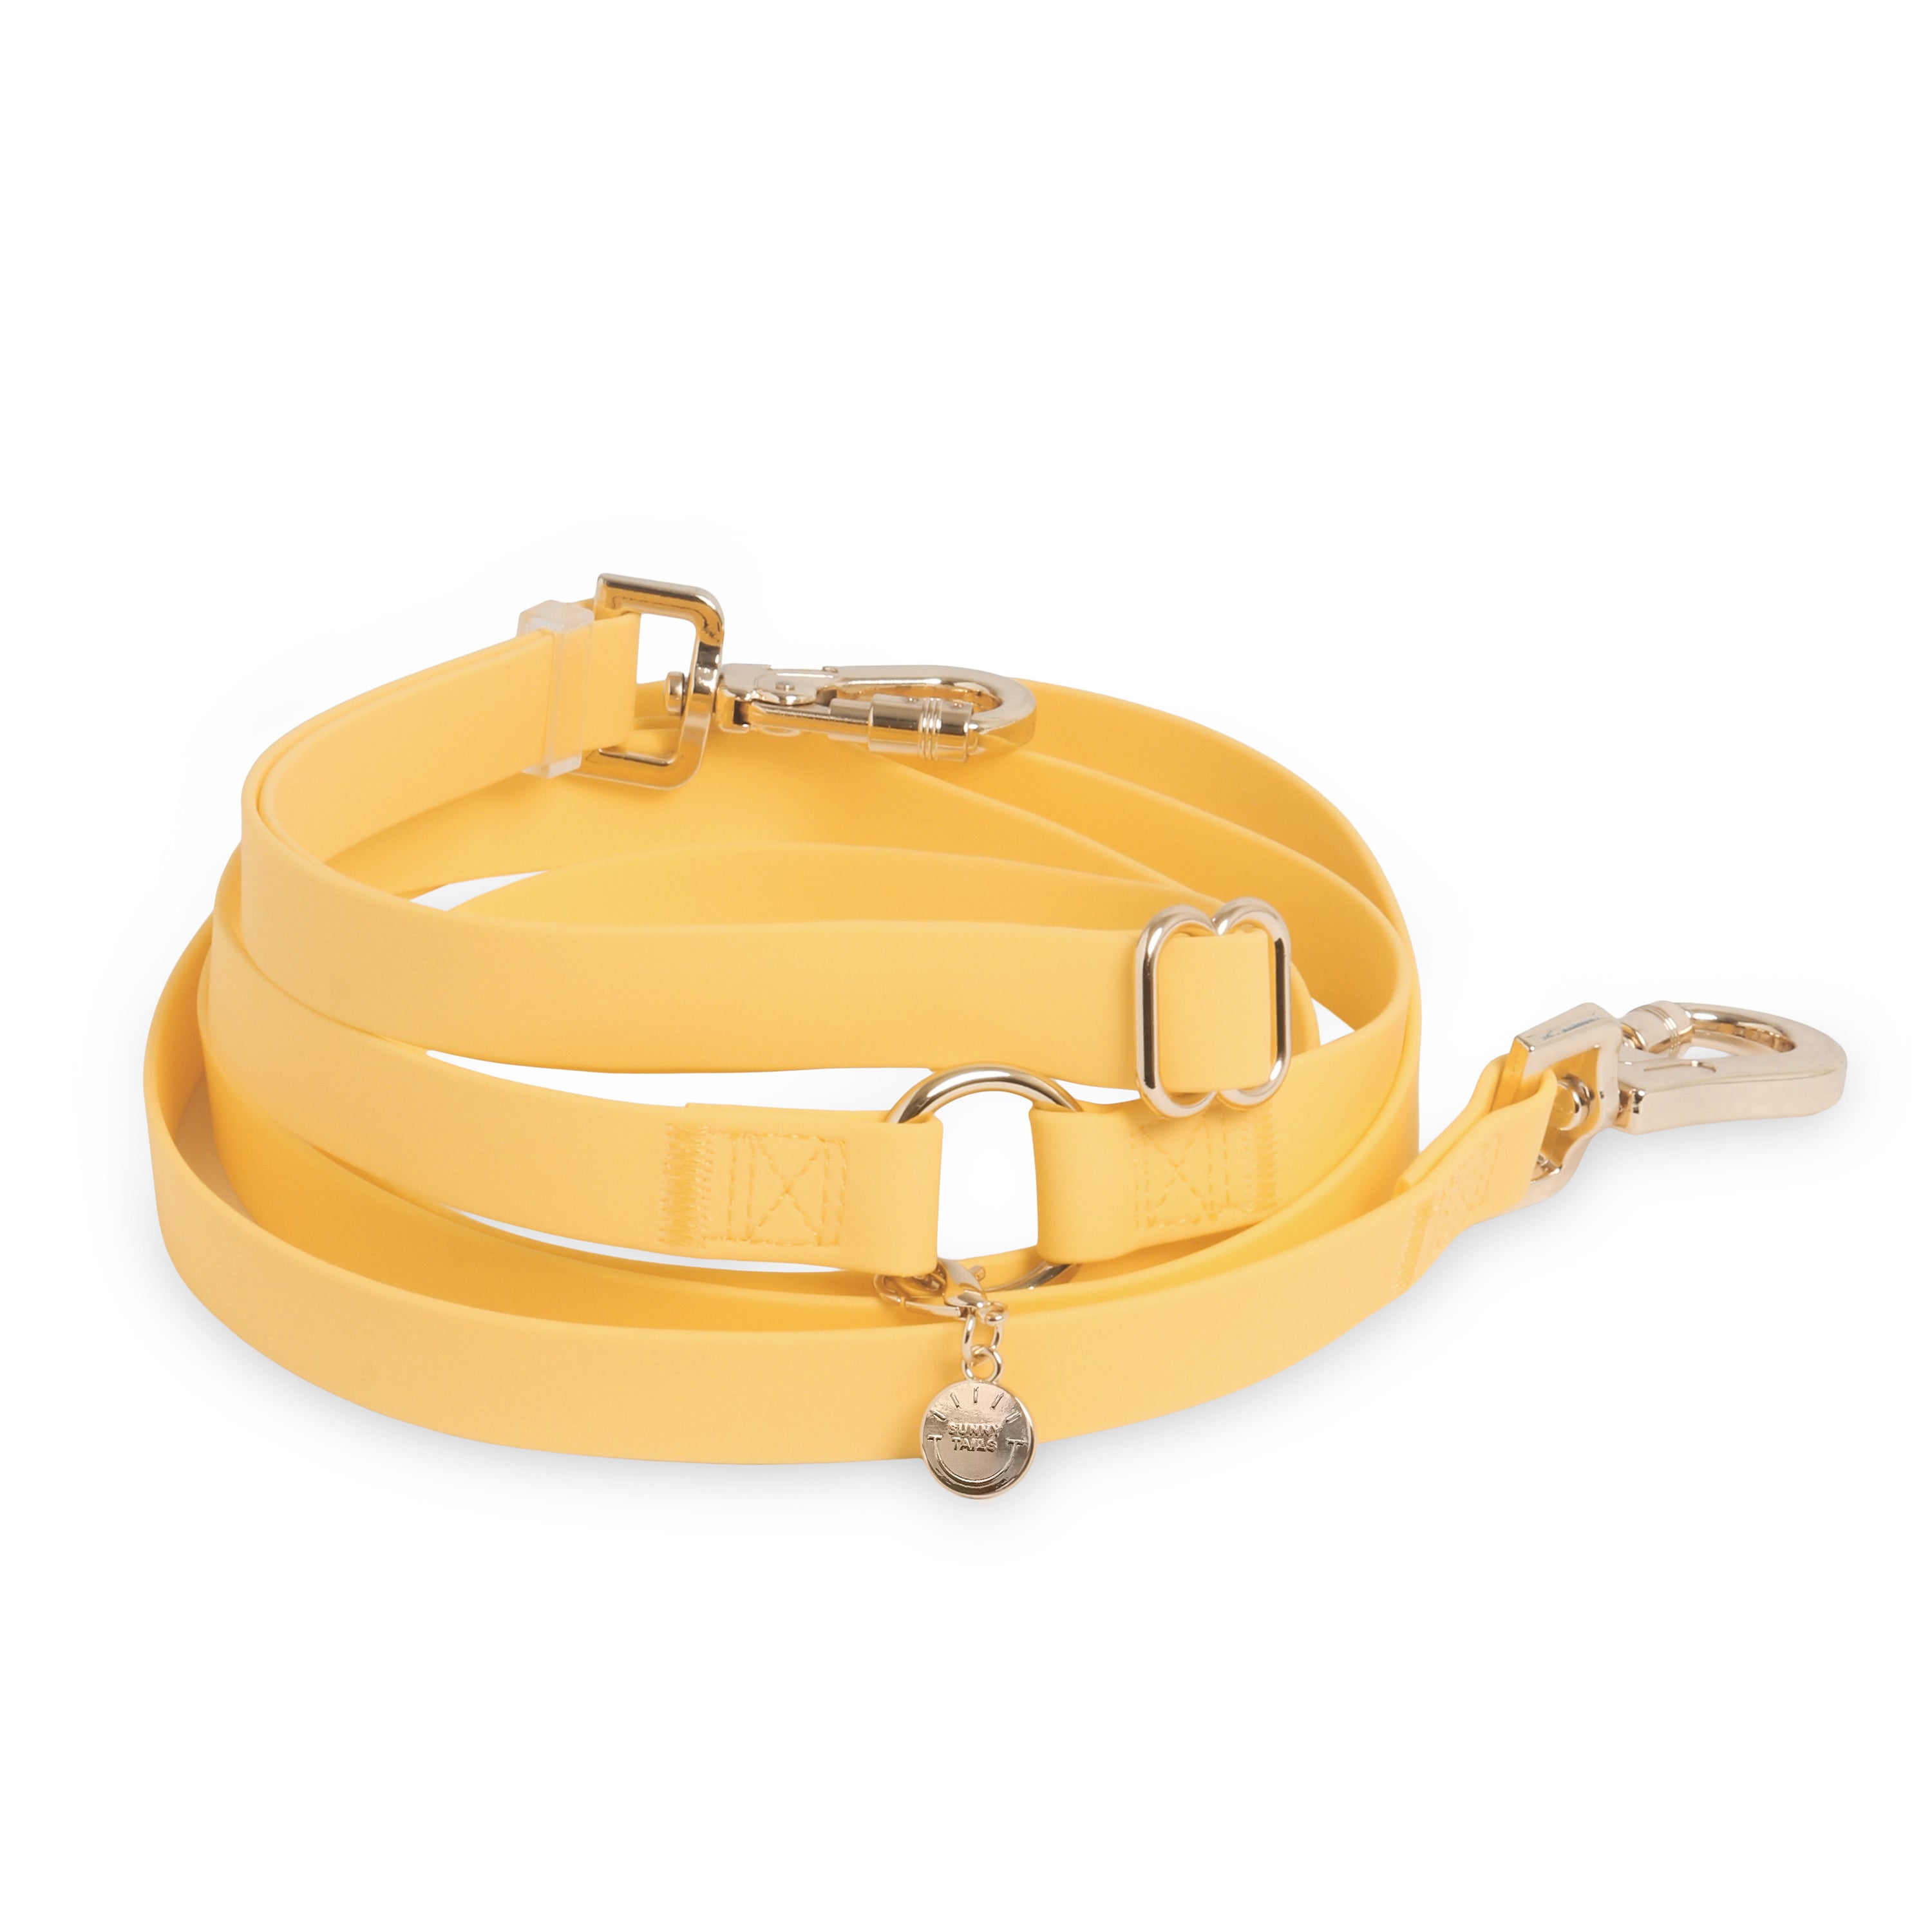 Cute & Super Safe Hardware Buckle Collar with Adorable Detachable